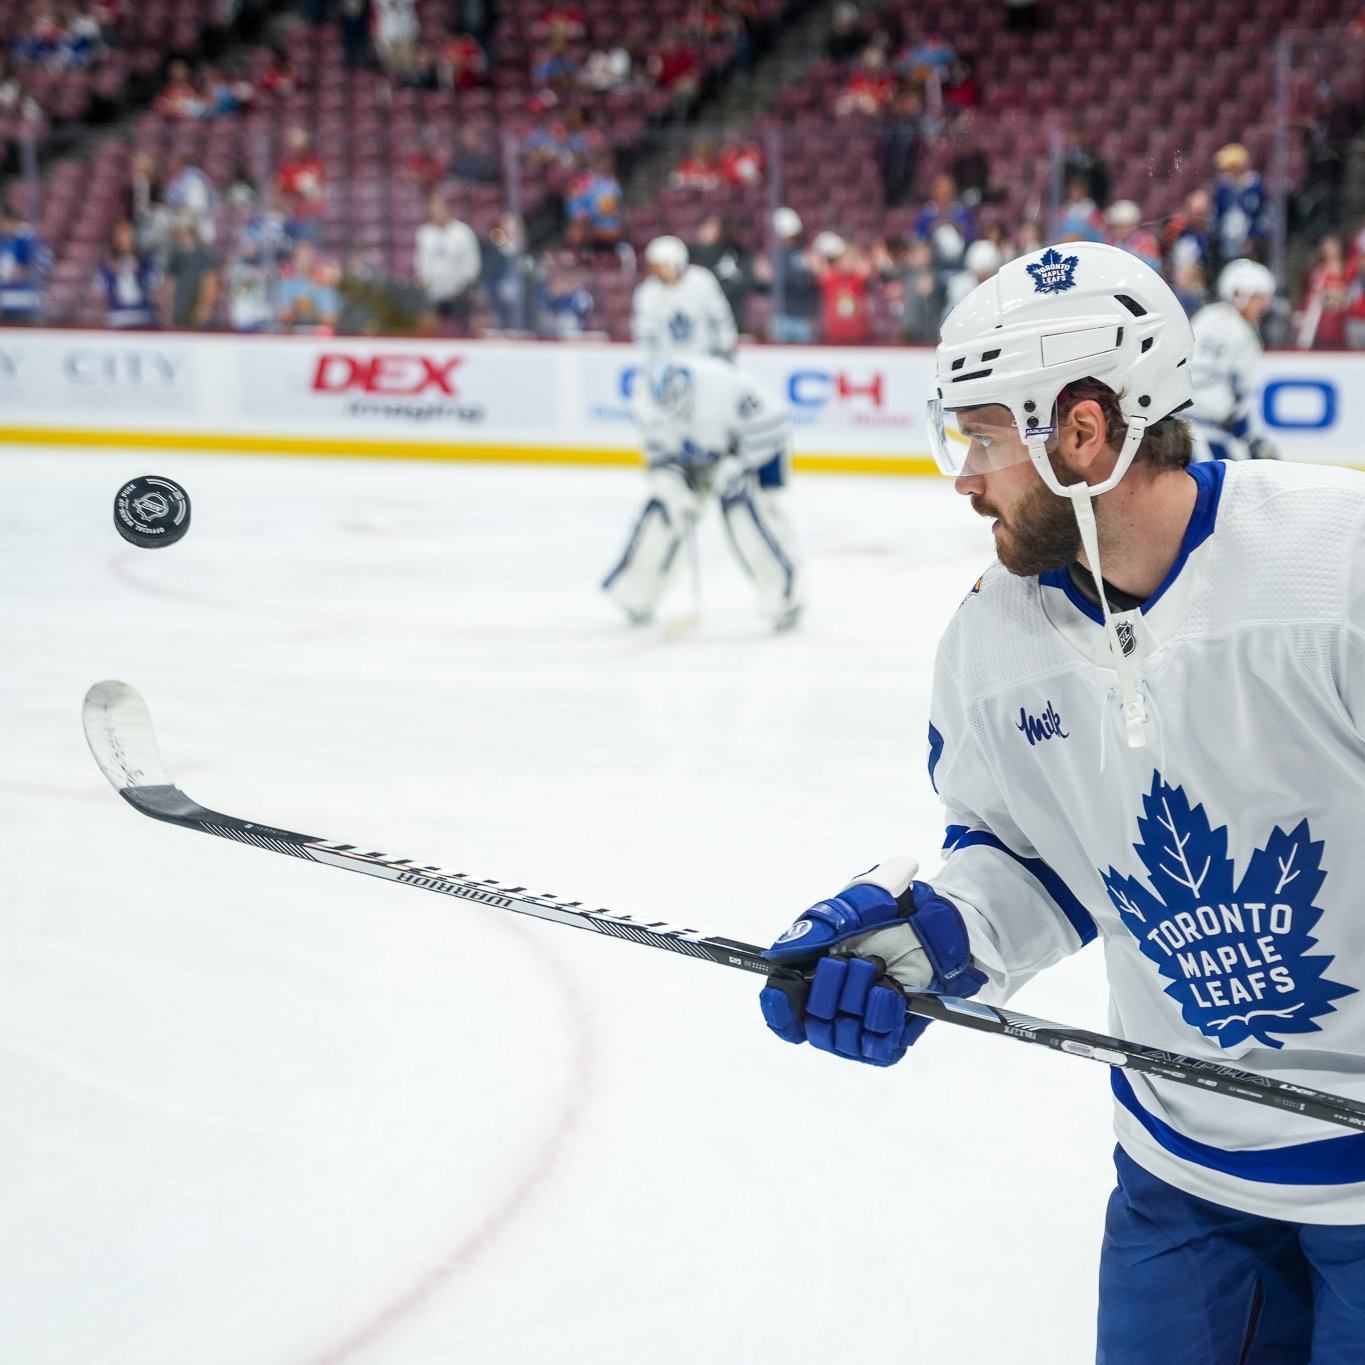 X 上的Toronto Maple Leafs：「The correct answer for today's